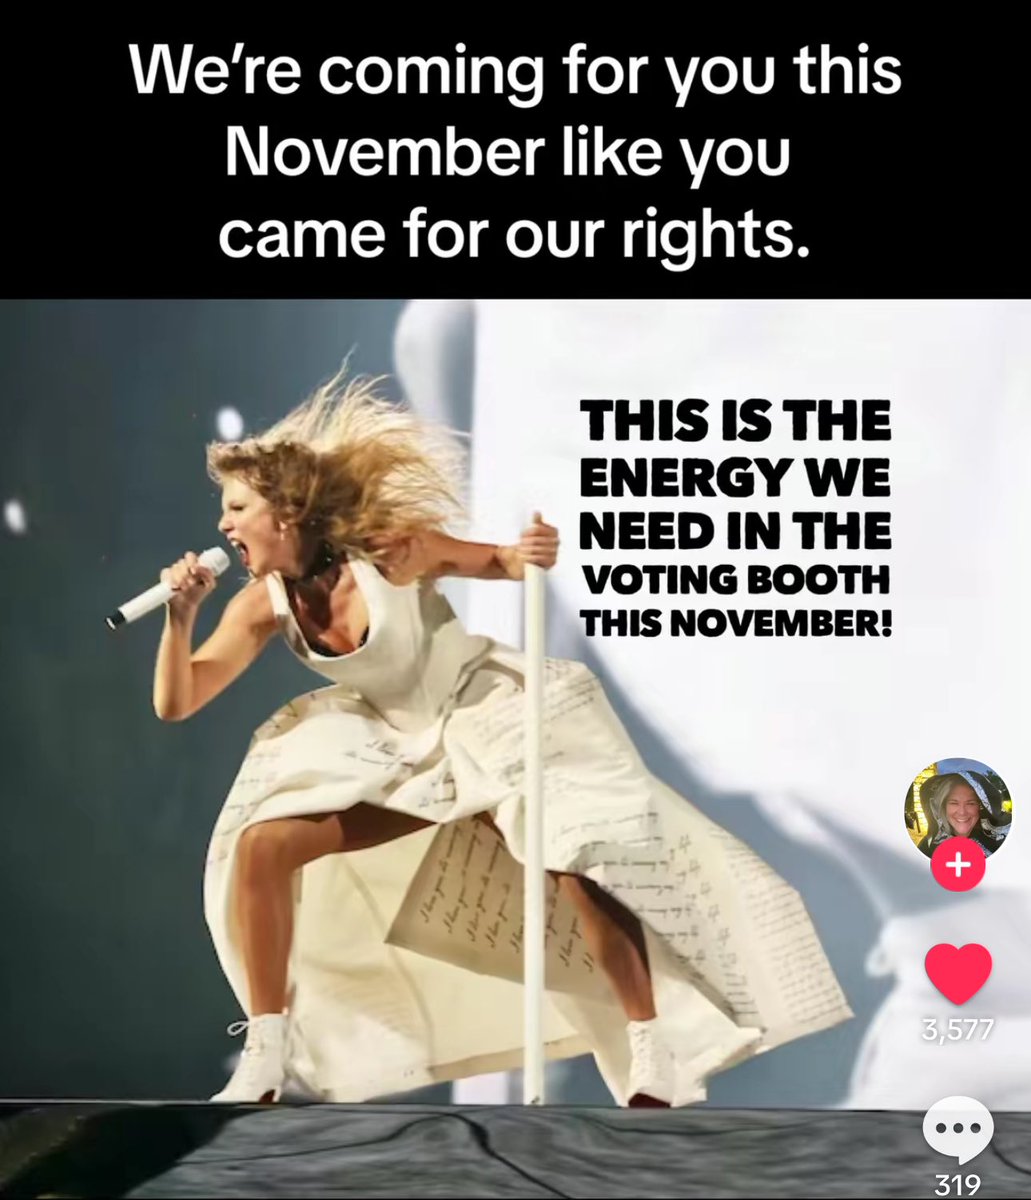 #ResistanceUnited #ProudBlue #DemVoice1 @taylorswift13 

You’ve been warned…